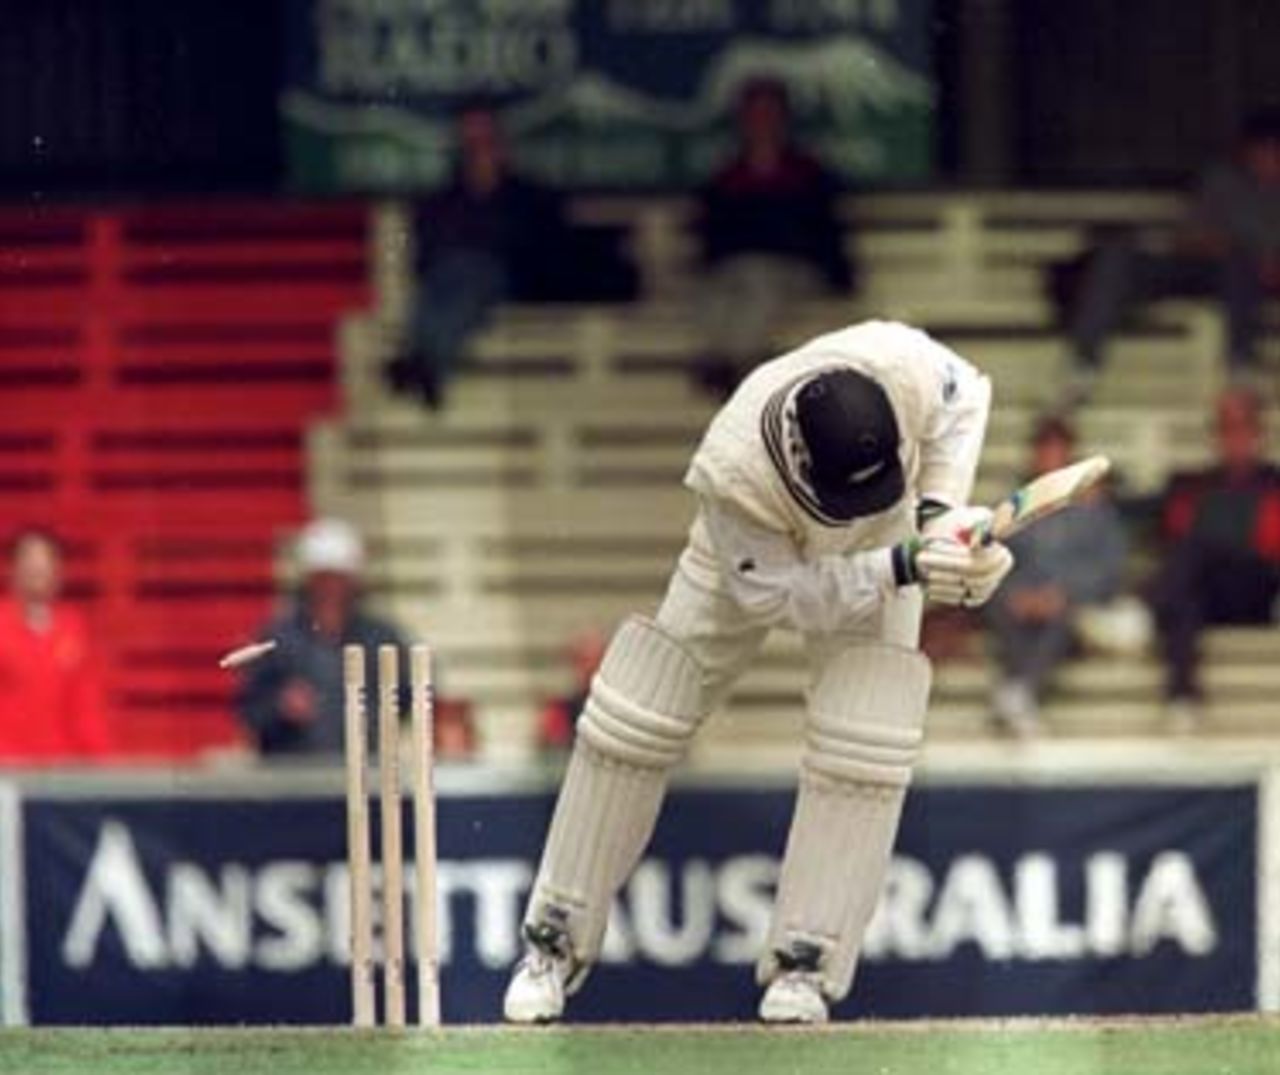 Bryan Young is bowled by Reiffel during the Australia v New Zealand match at Bellerive Oval in Tasmania. November 30th 1997.